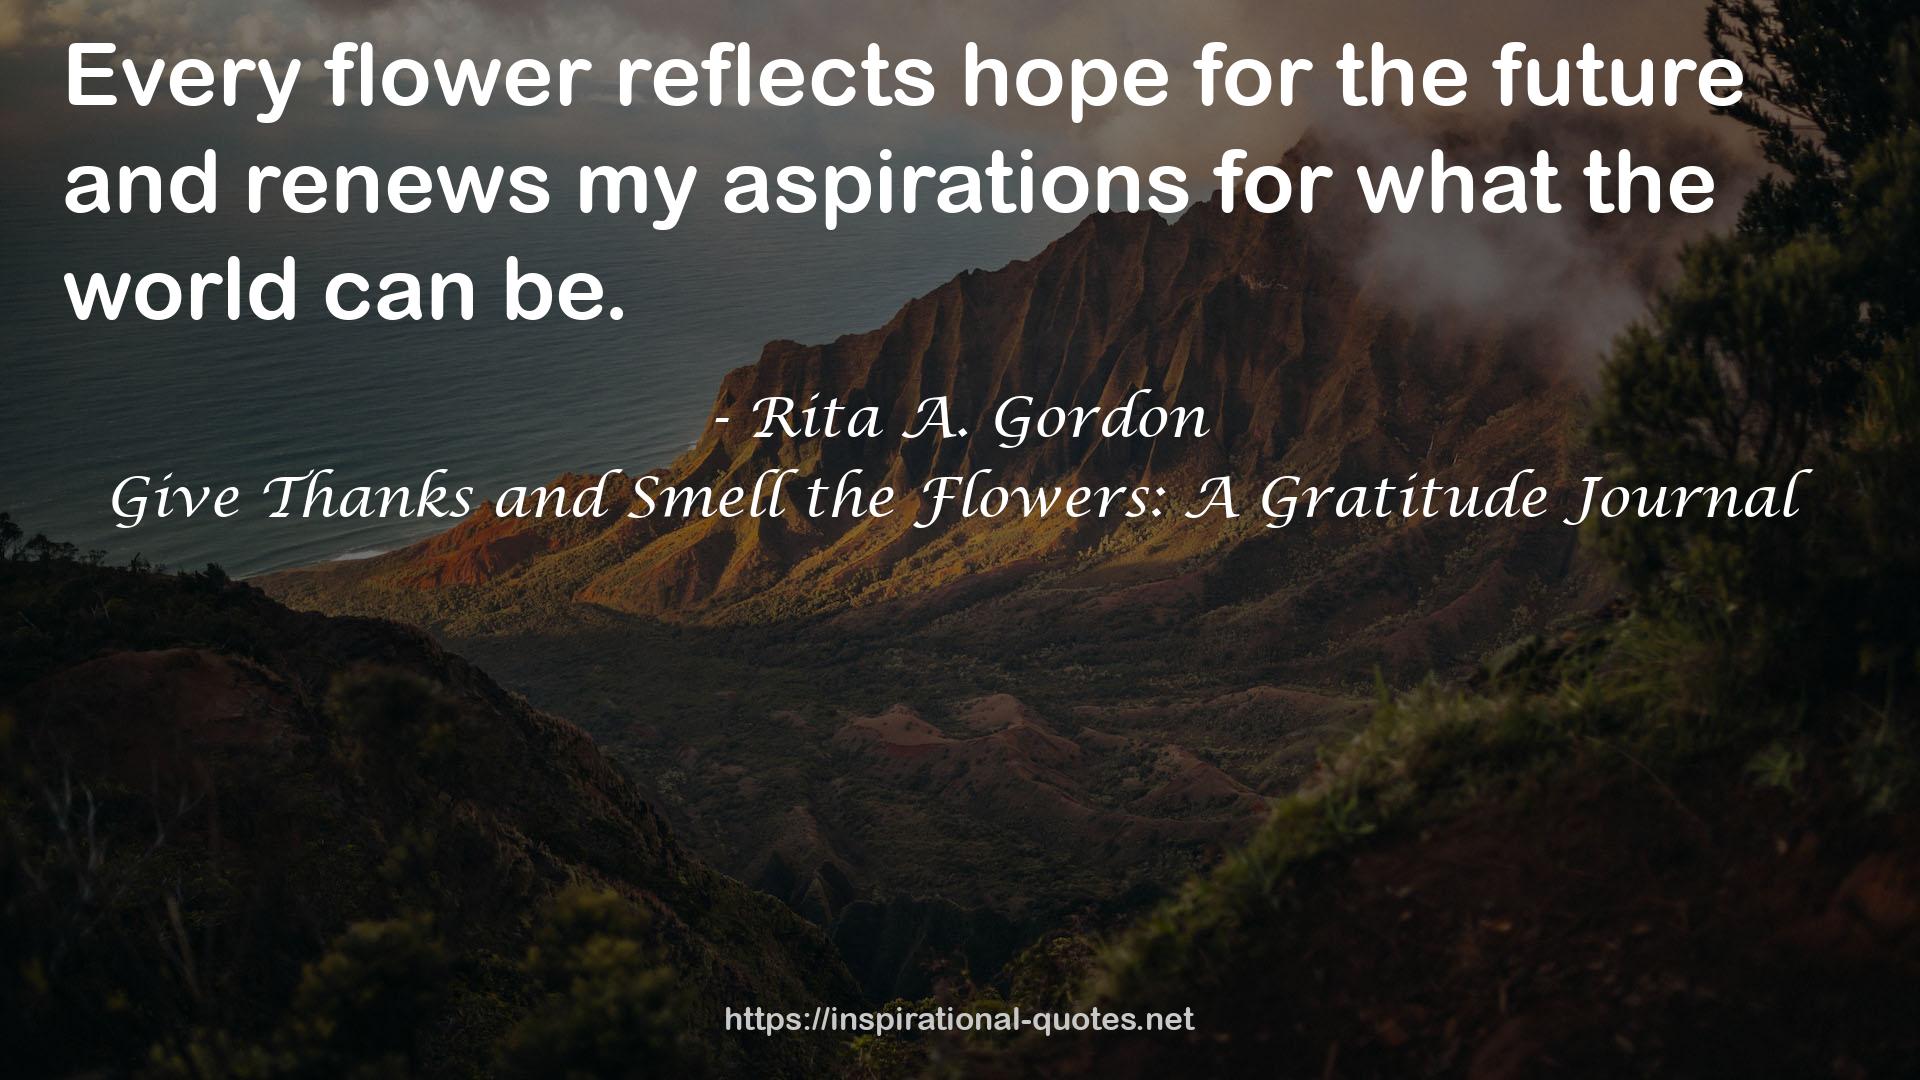 Give Thanks and Smell the Flowers: A Gratitude Journal QUOTES